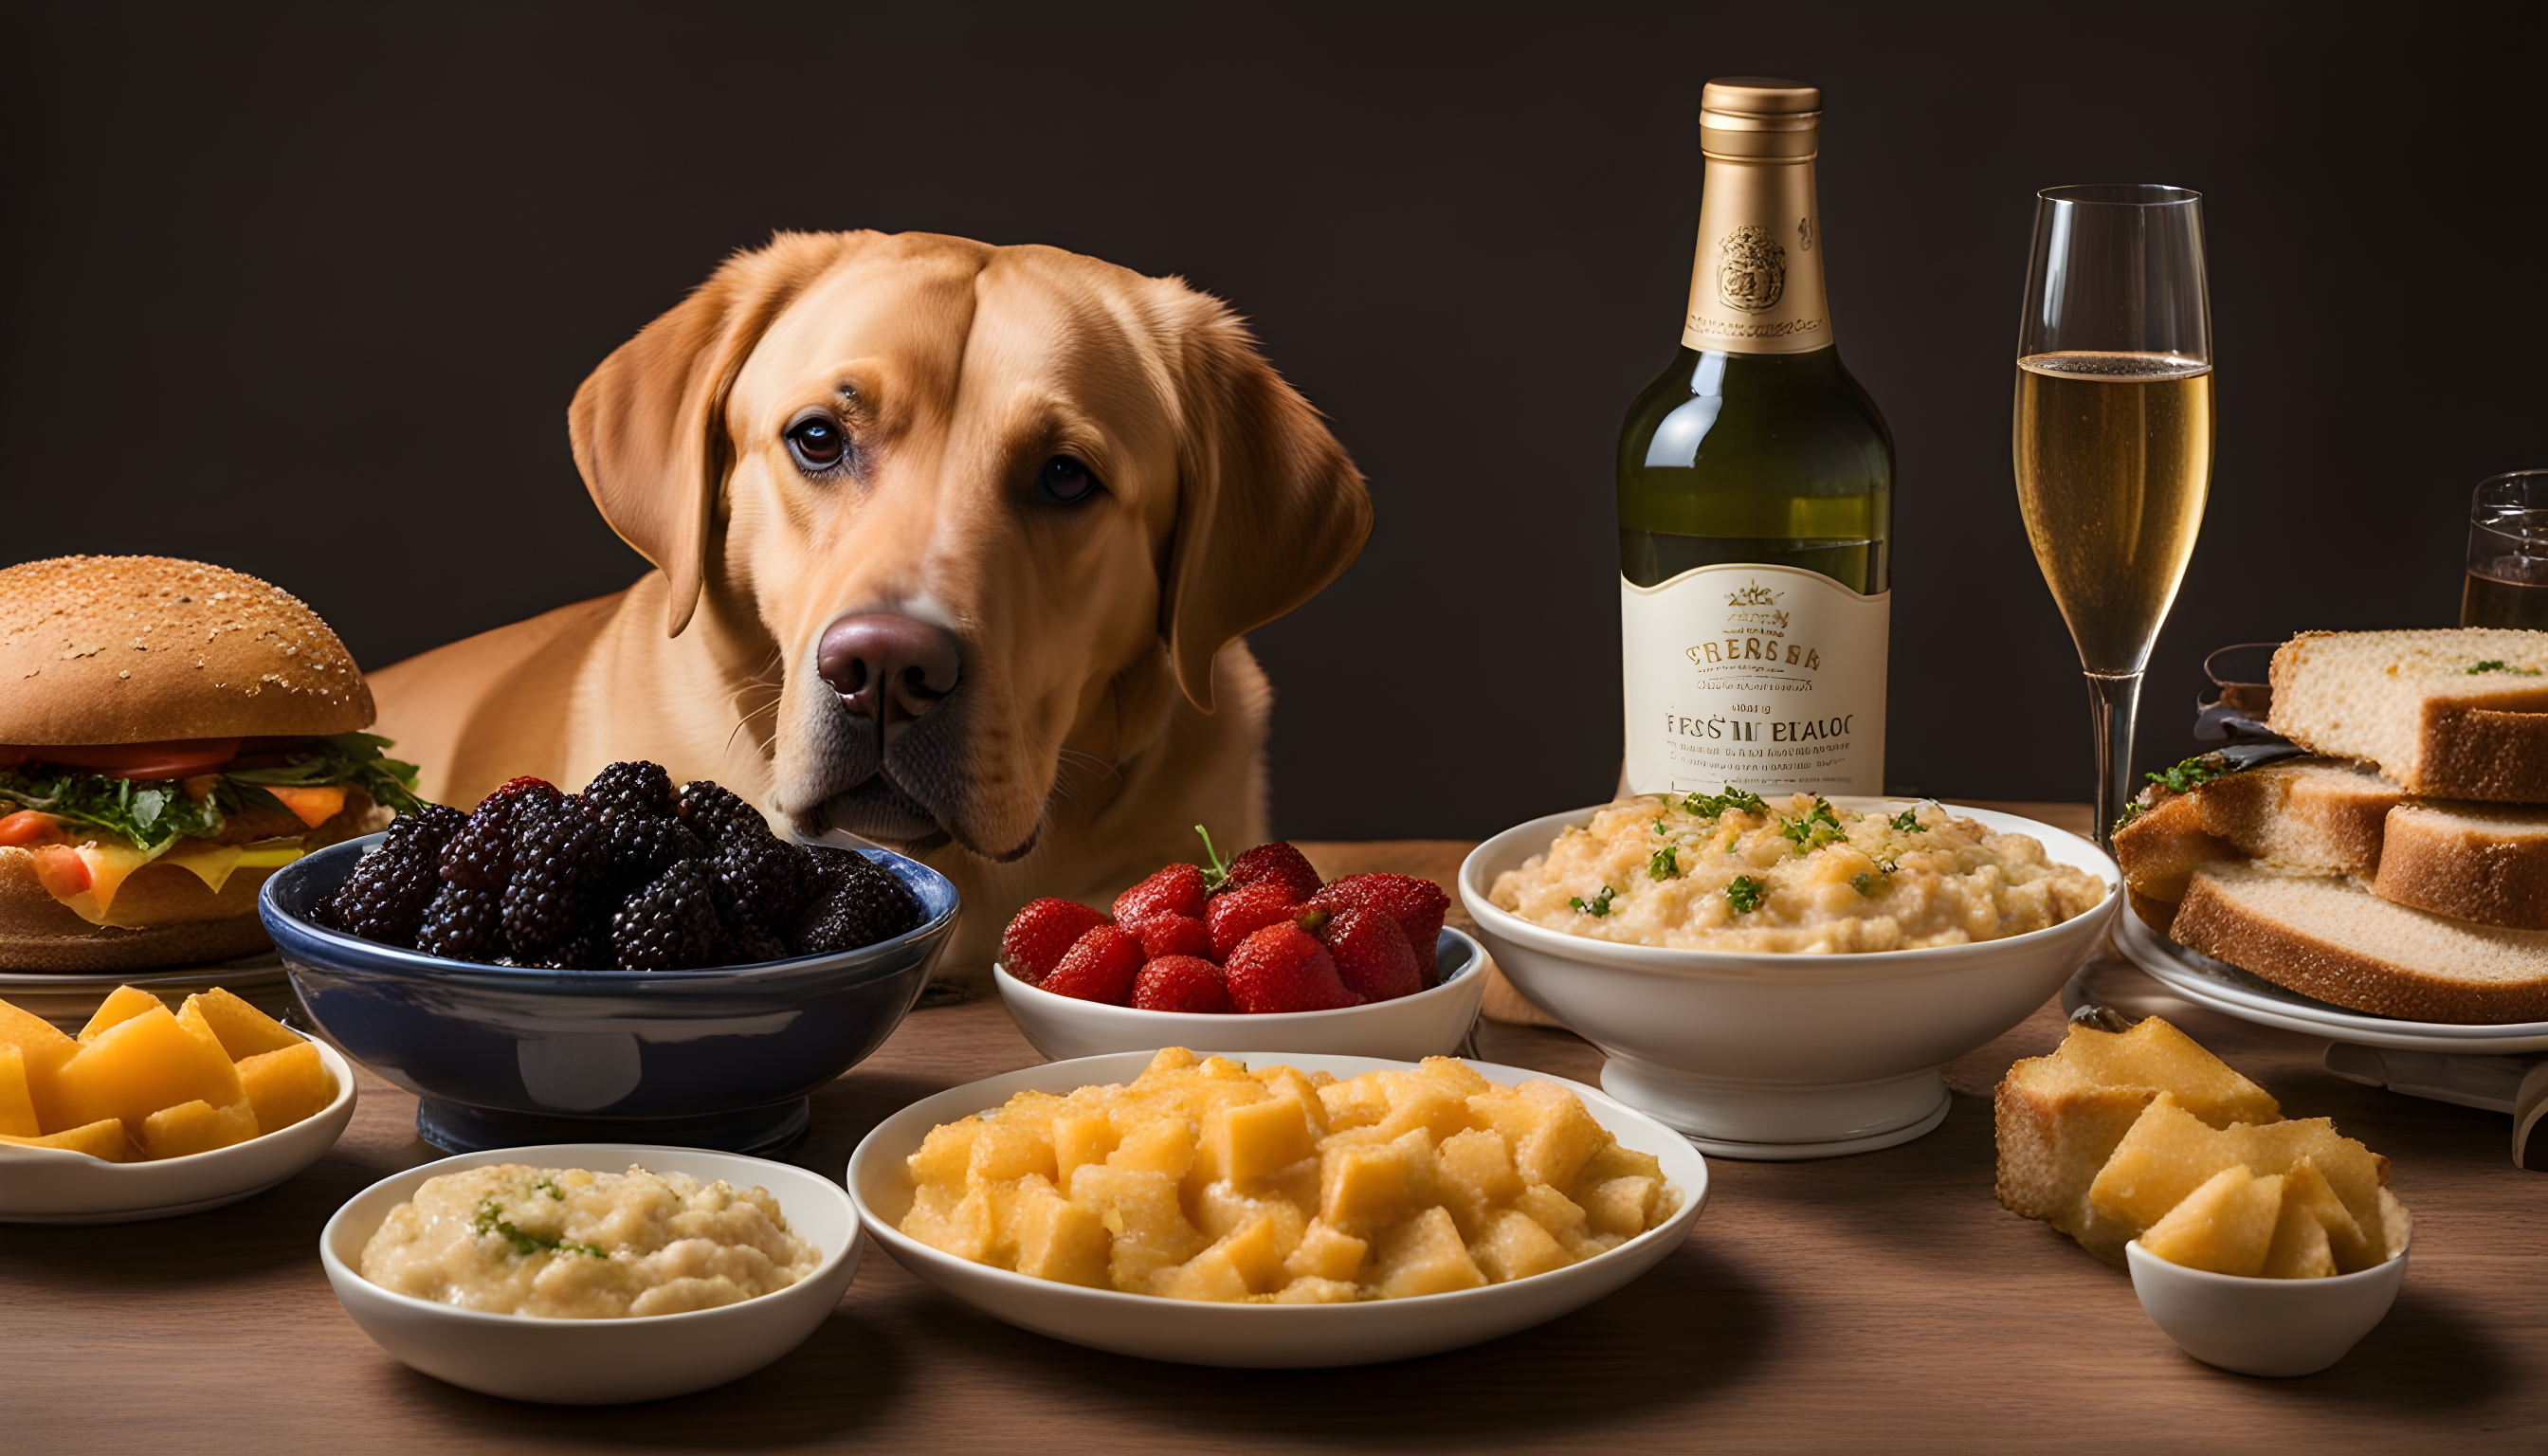 British Lab feasting on a gourmet spread fit for a king.